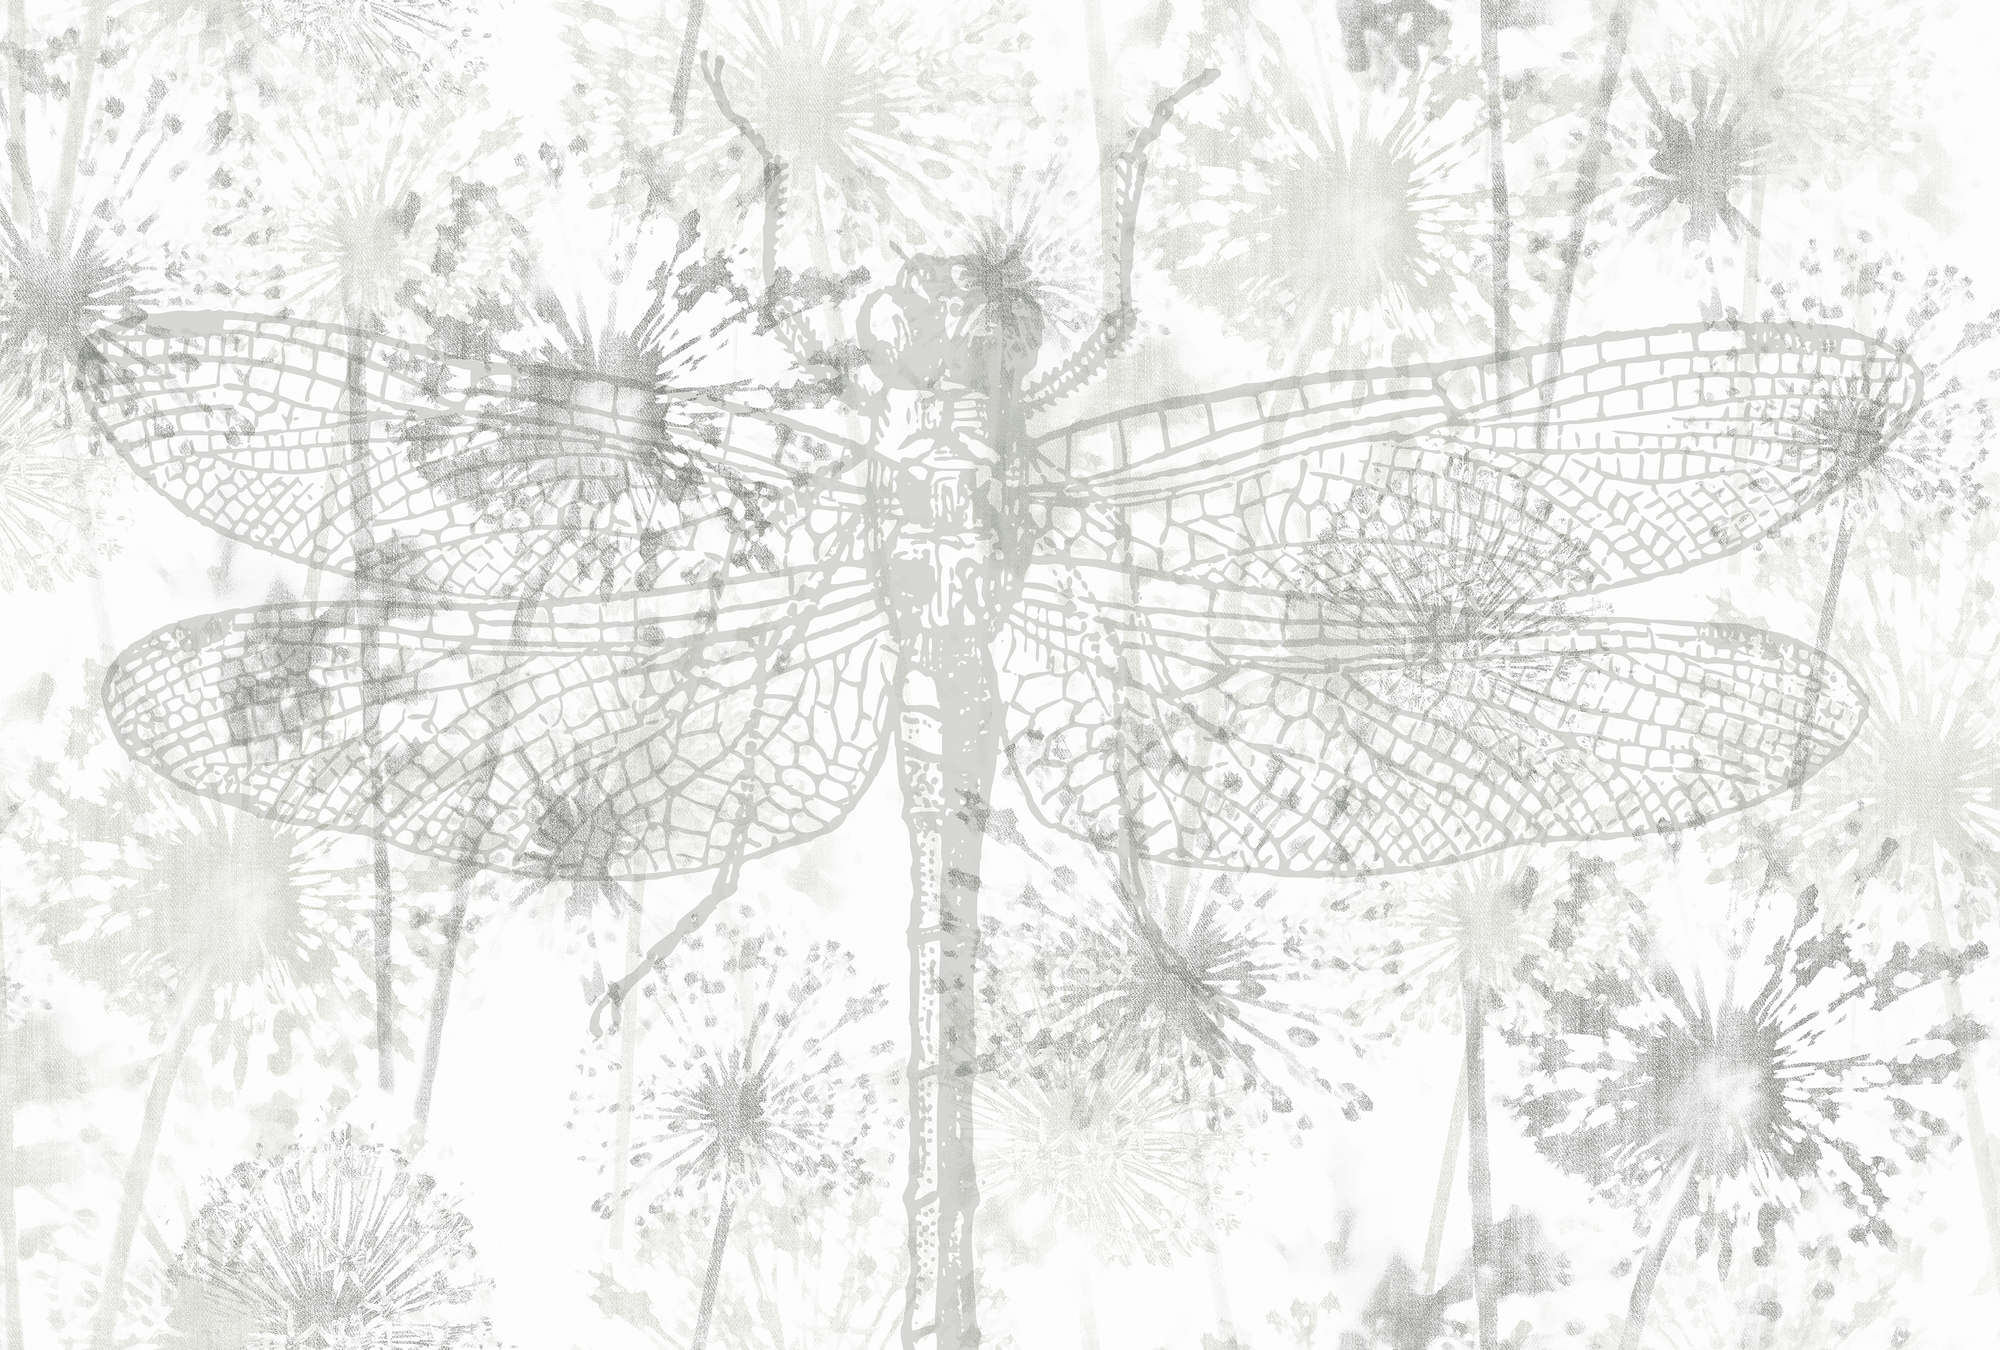             Photo wallpaper flowers & dragonflies with natural pattern - grey, white
        